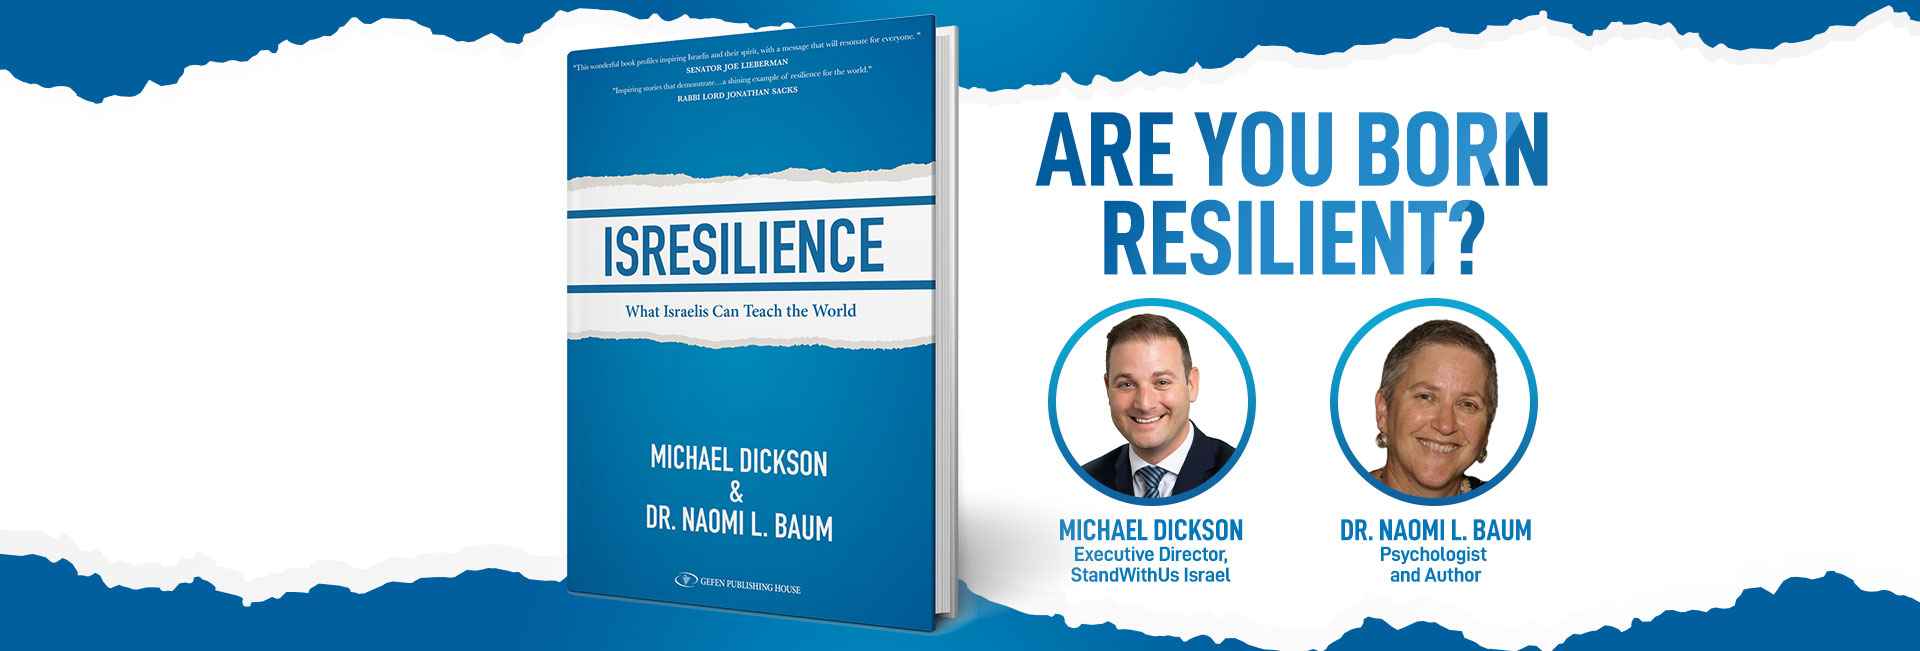 Are You Born Resilient